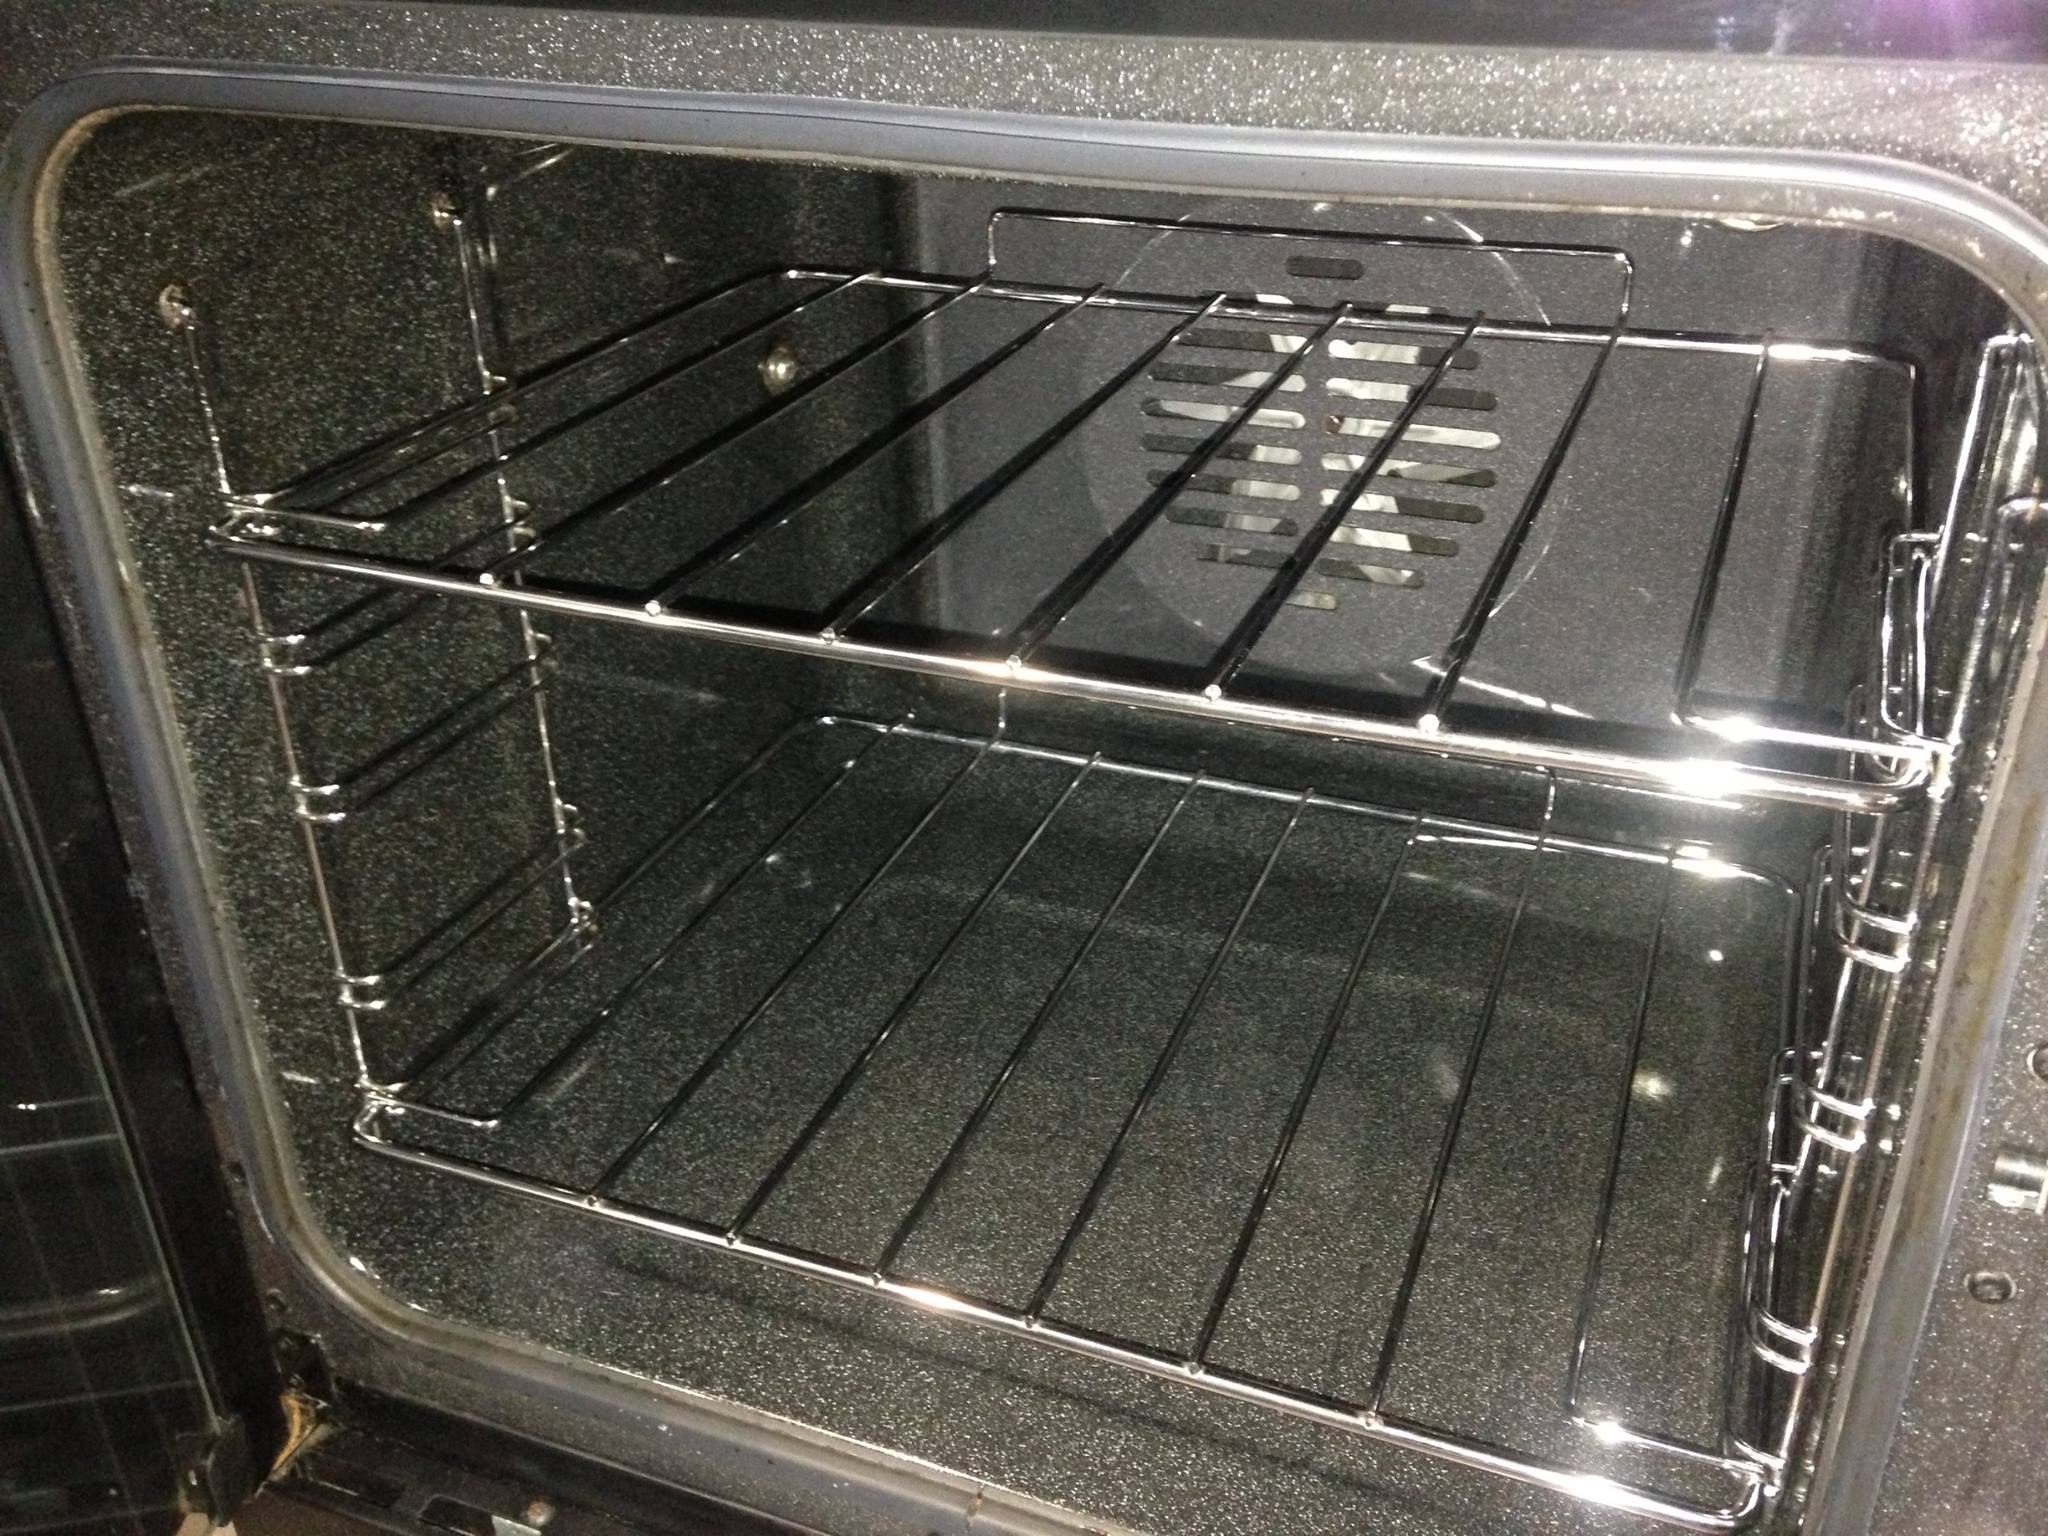 Oven cleaning service after look